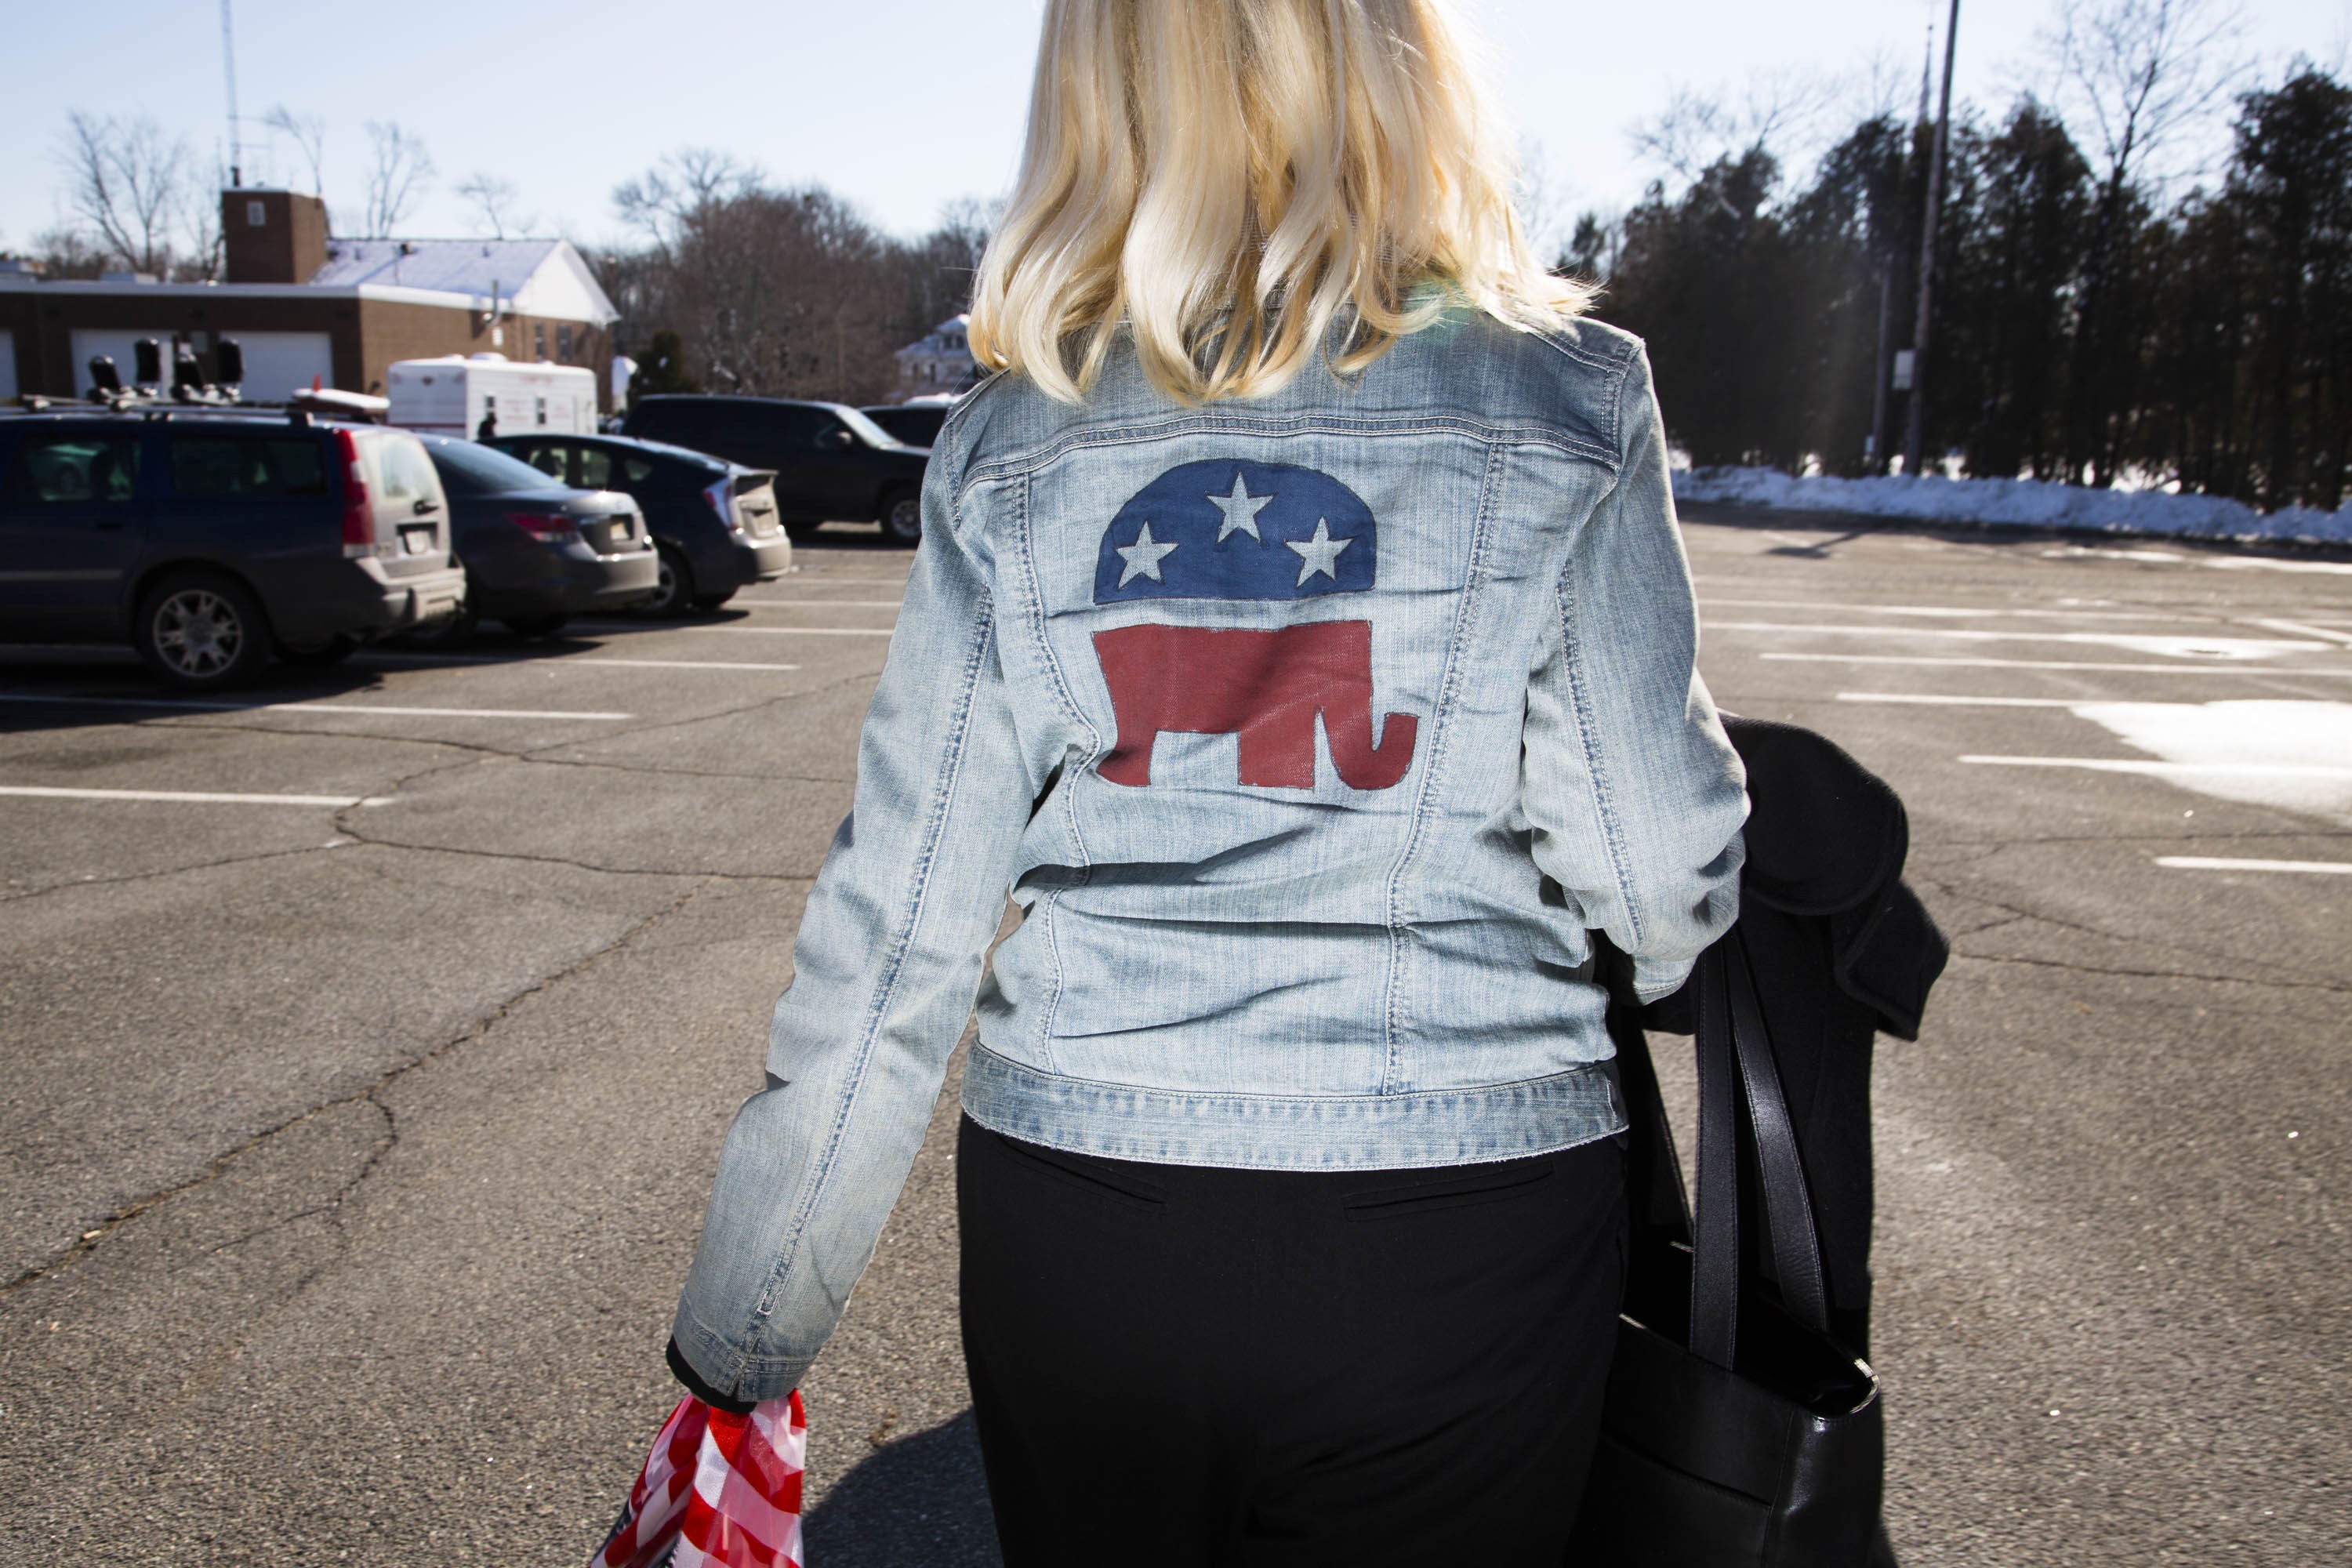 A woman wears a jacket depicting the Republican Party's elephant on Feb. 7, 2016, in Hampton, N.H. (Landon Nordeman for TIME)